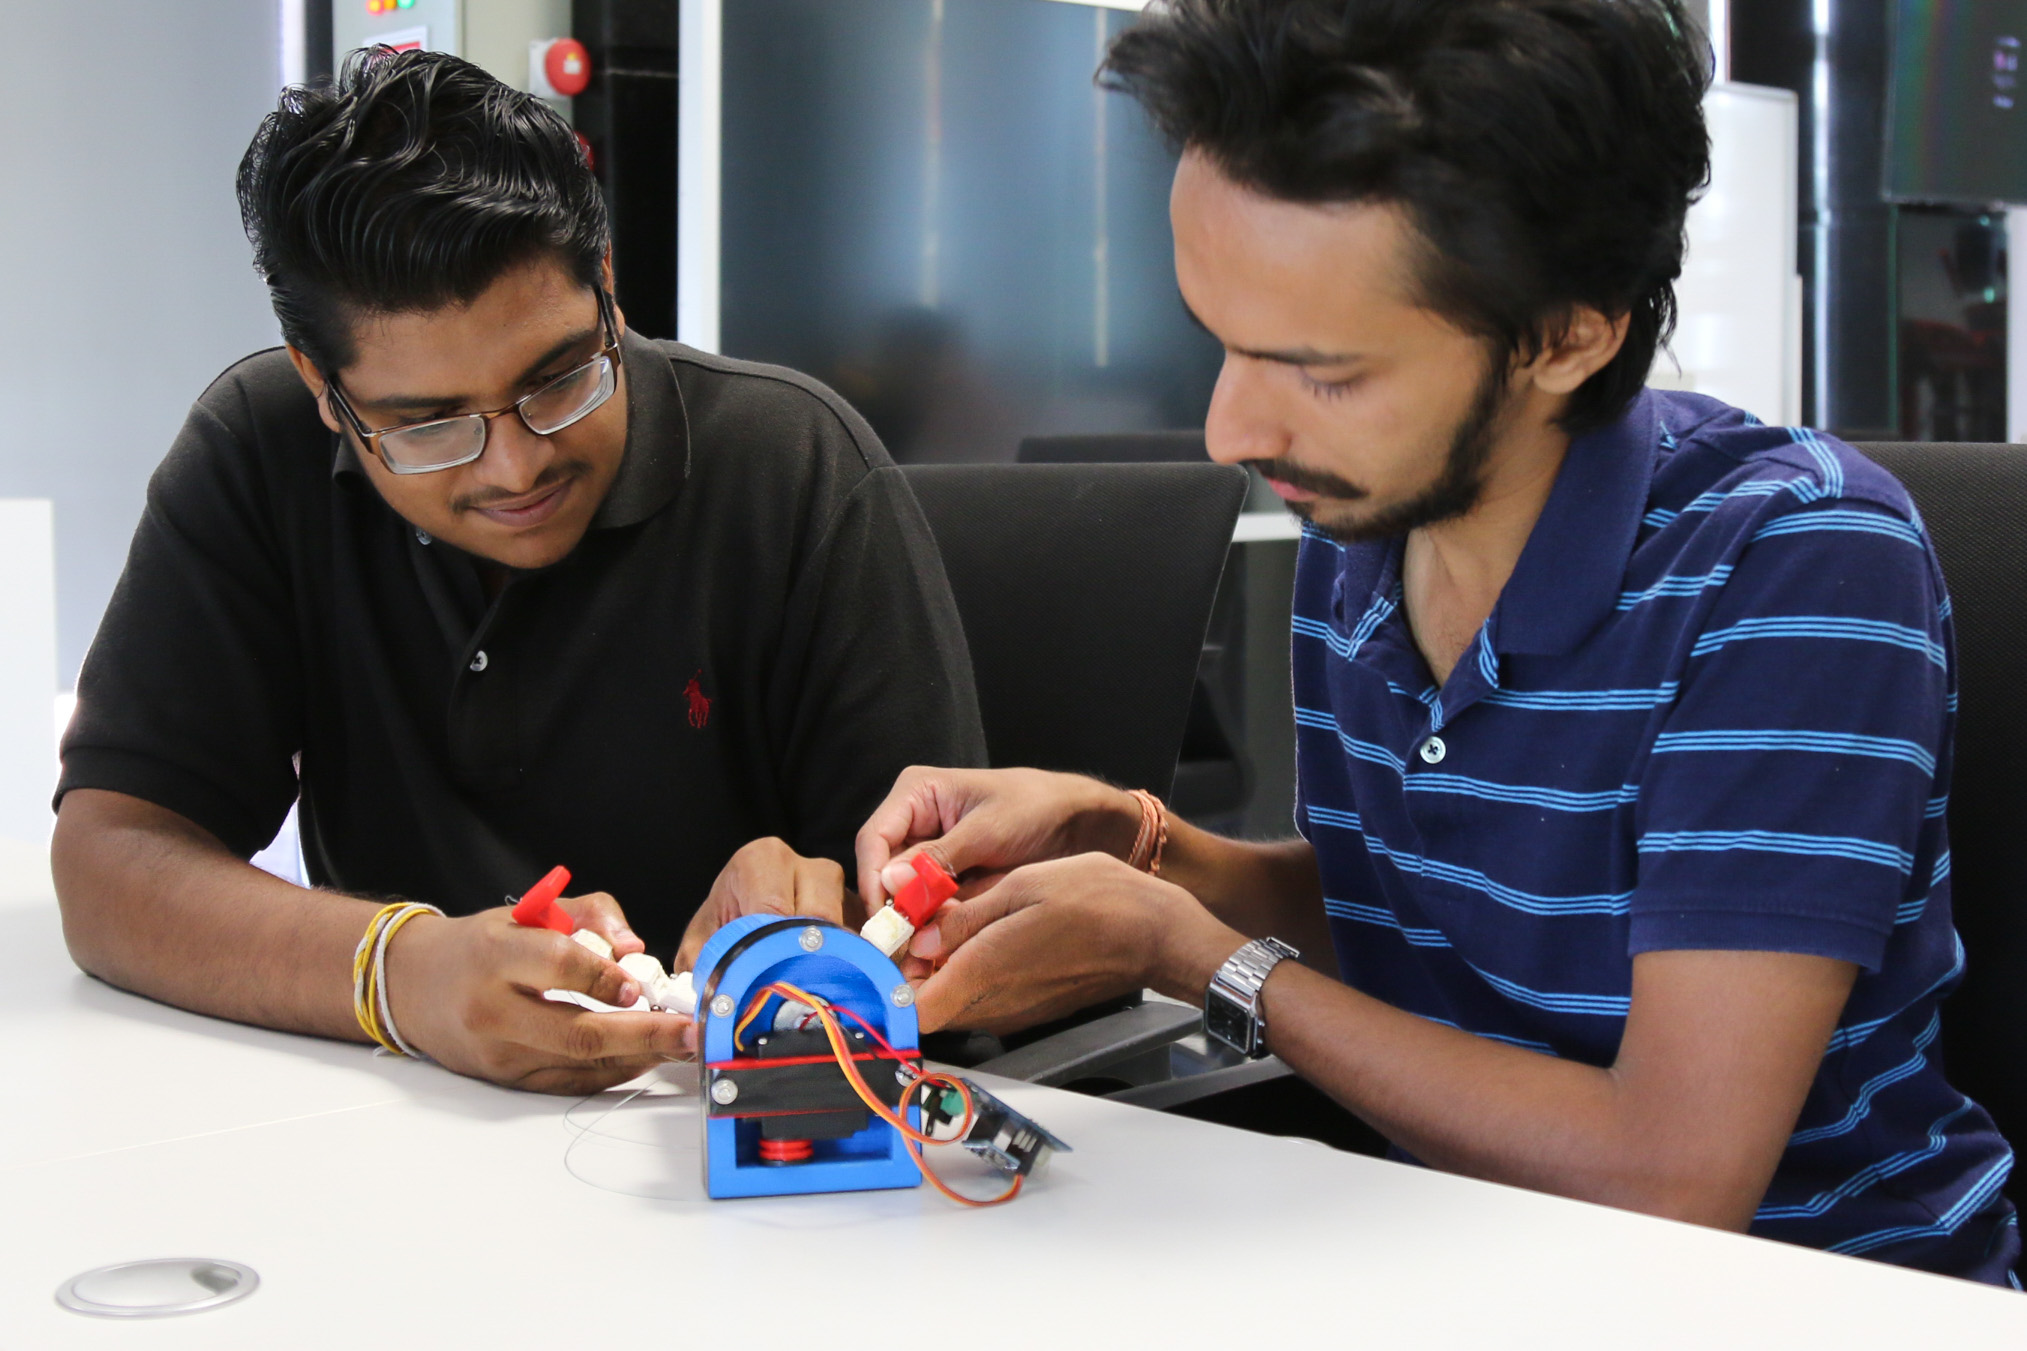 Two Engineering students implementing a part of the prothesis arm project that could help amputees carry out specific tasks.